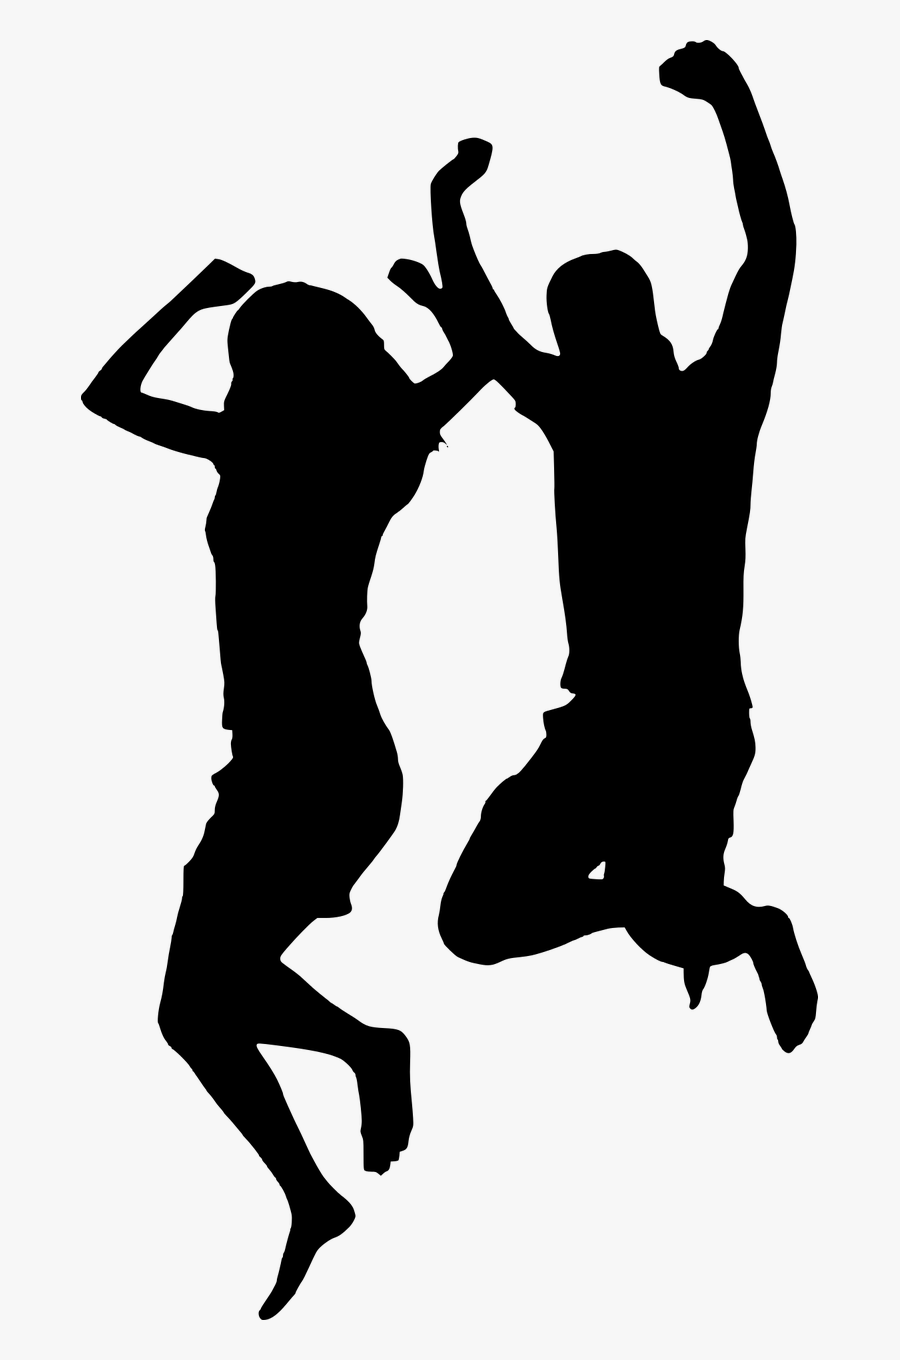 Clip Art Vacation Silhouette Couples Jumping - Couple Jumping Silhouette, Transparent Clipart